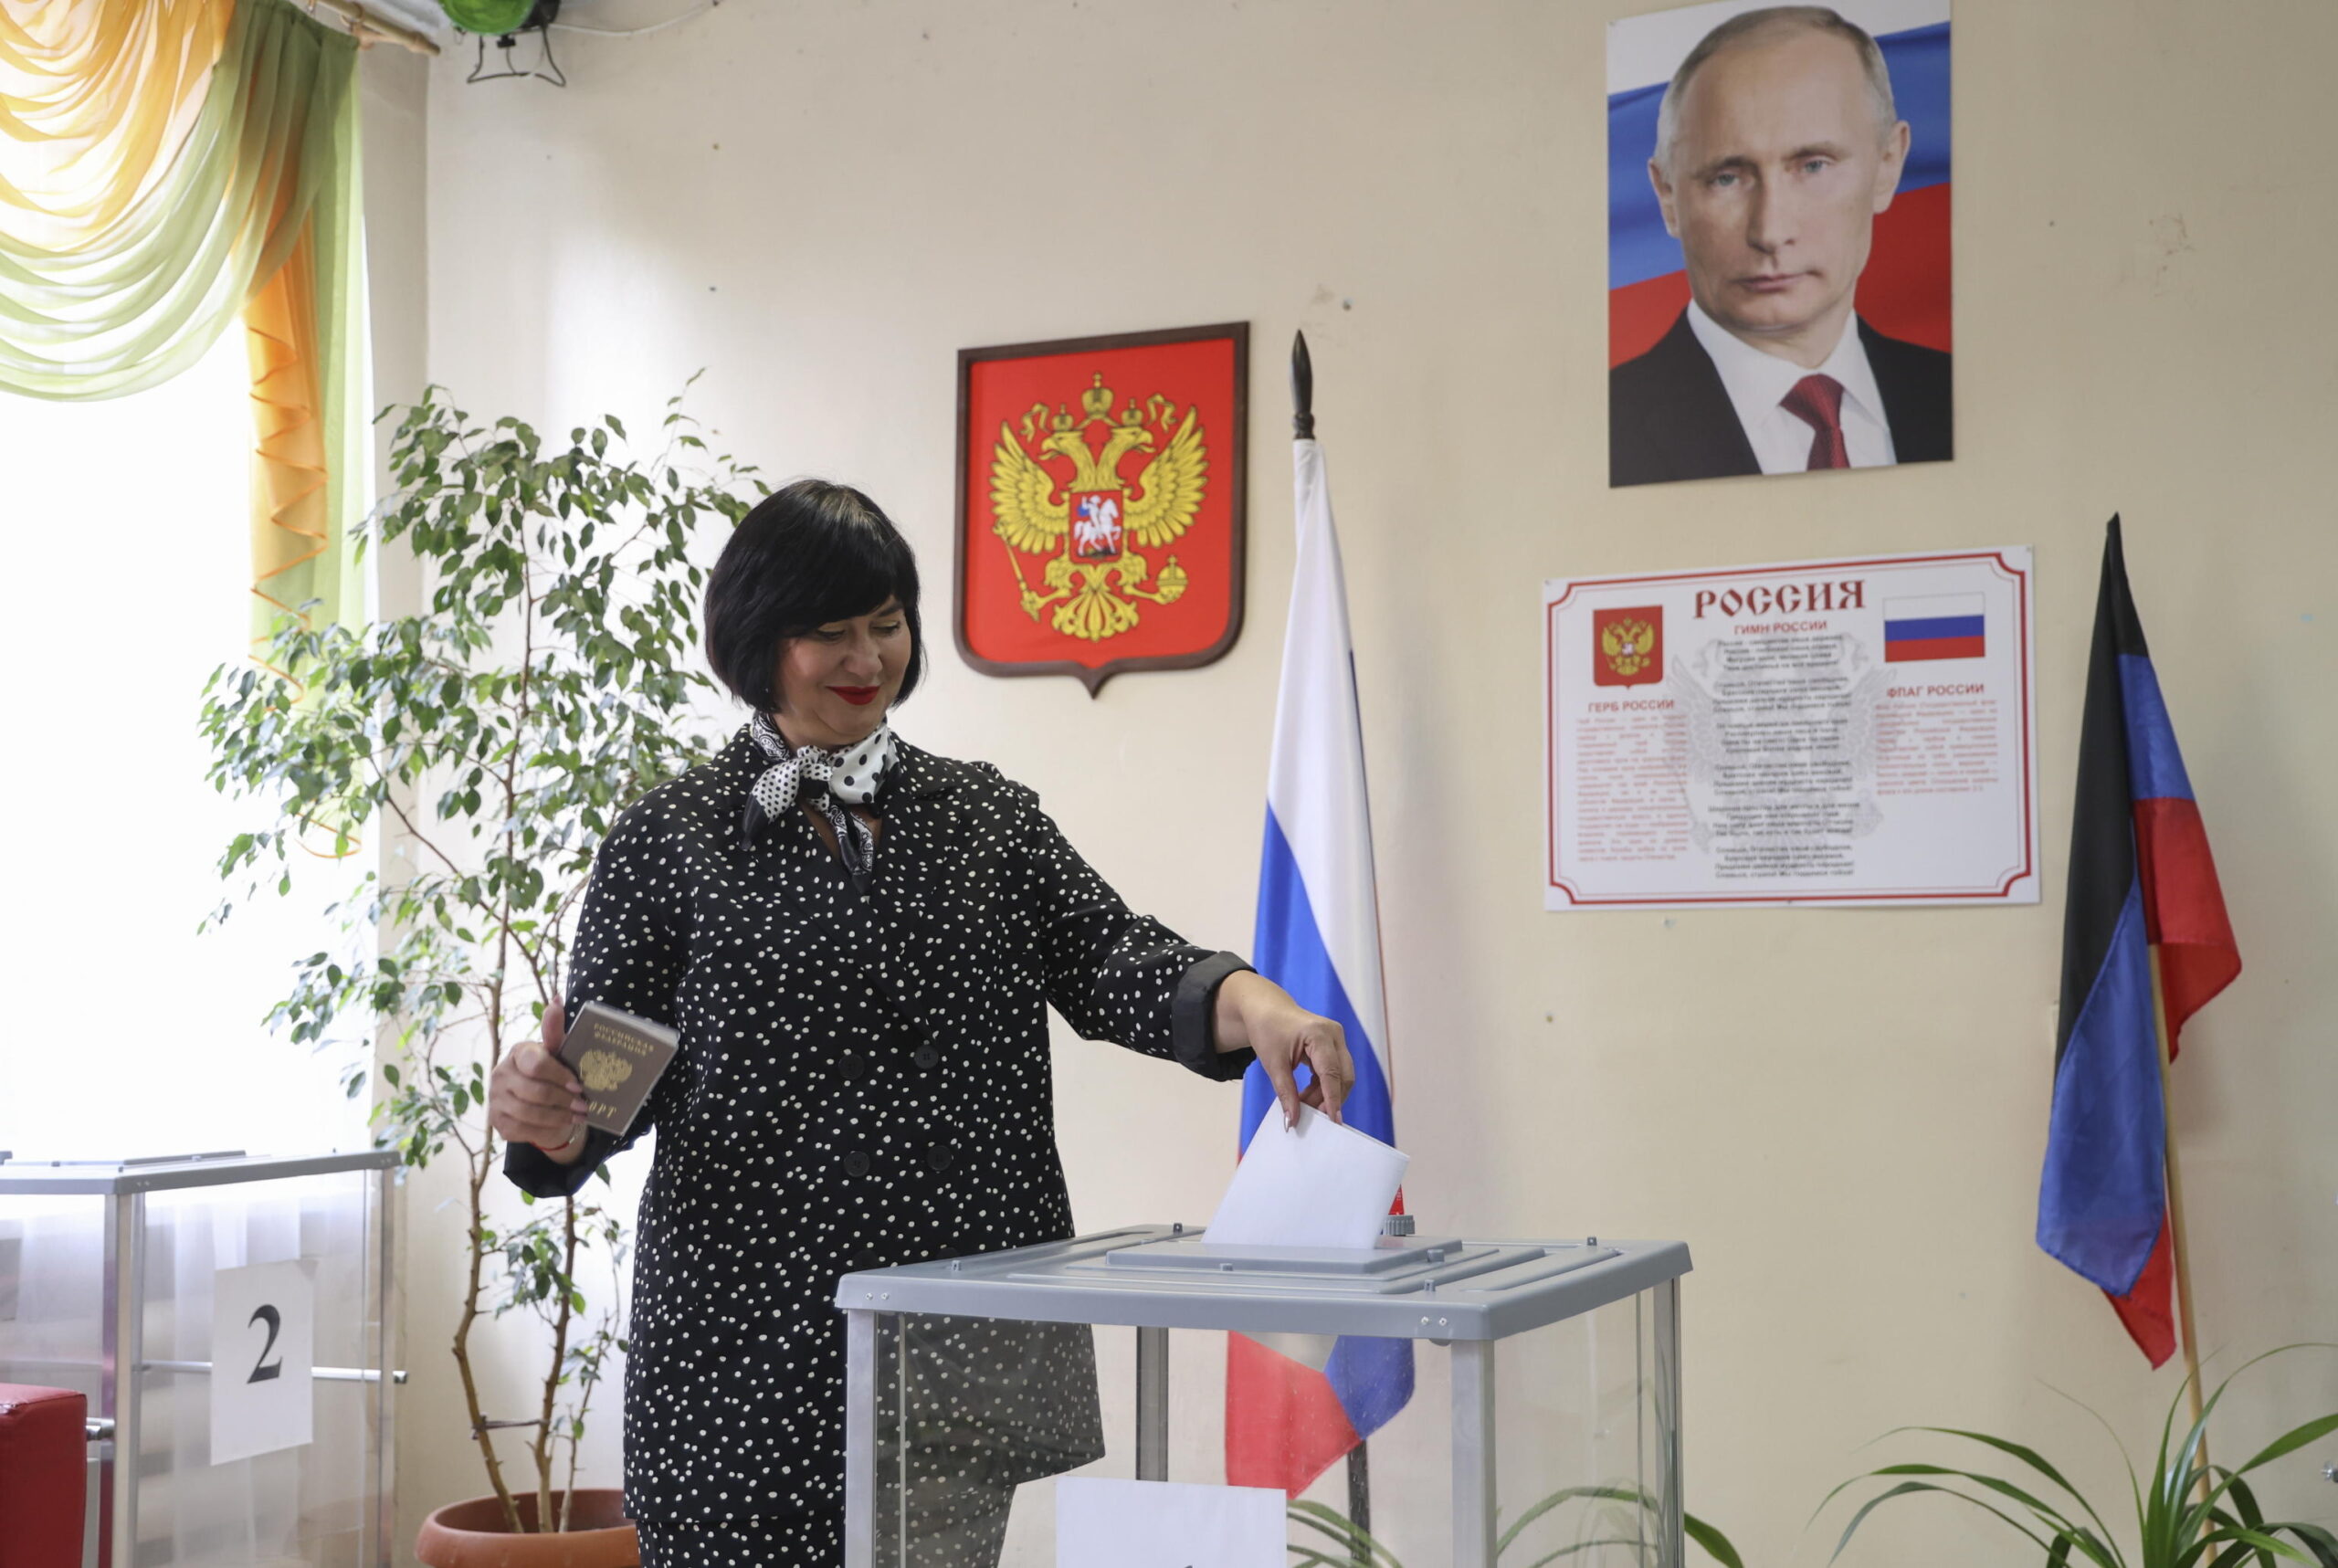 Ukraine and Putin’s show of force in the annexed regions: “United Russia won the elections by an overwhelming majority.”